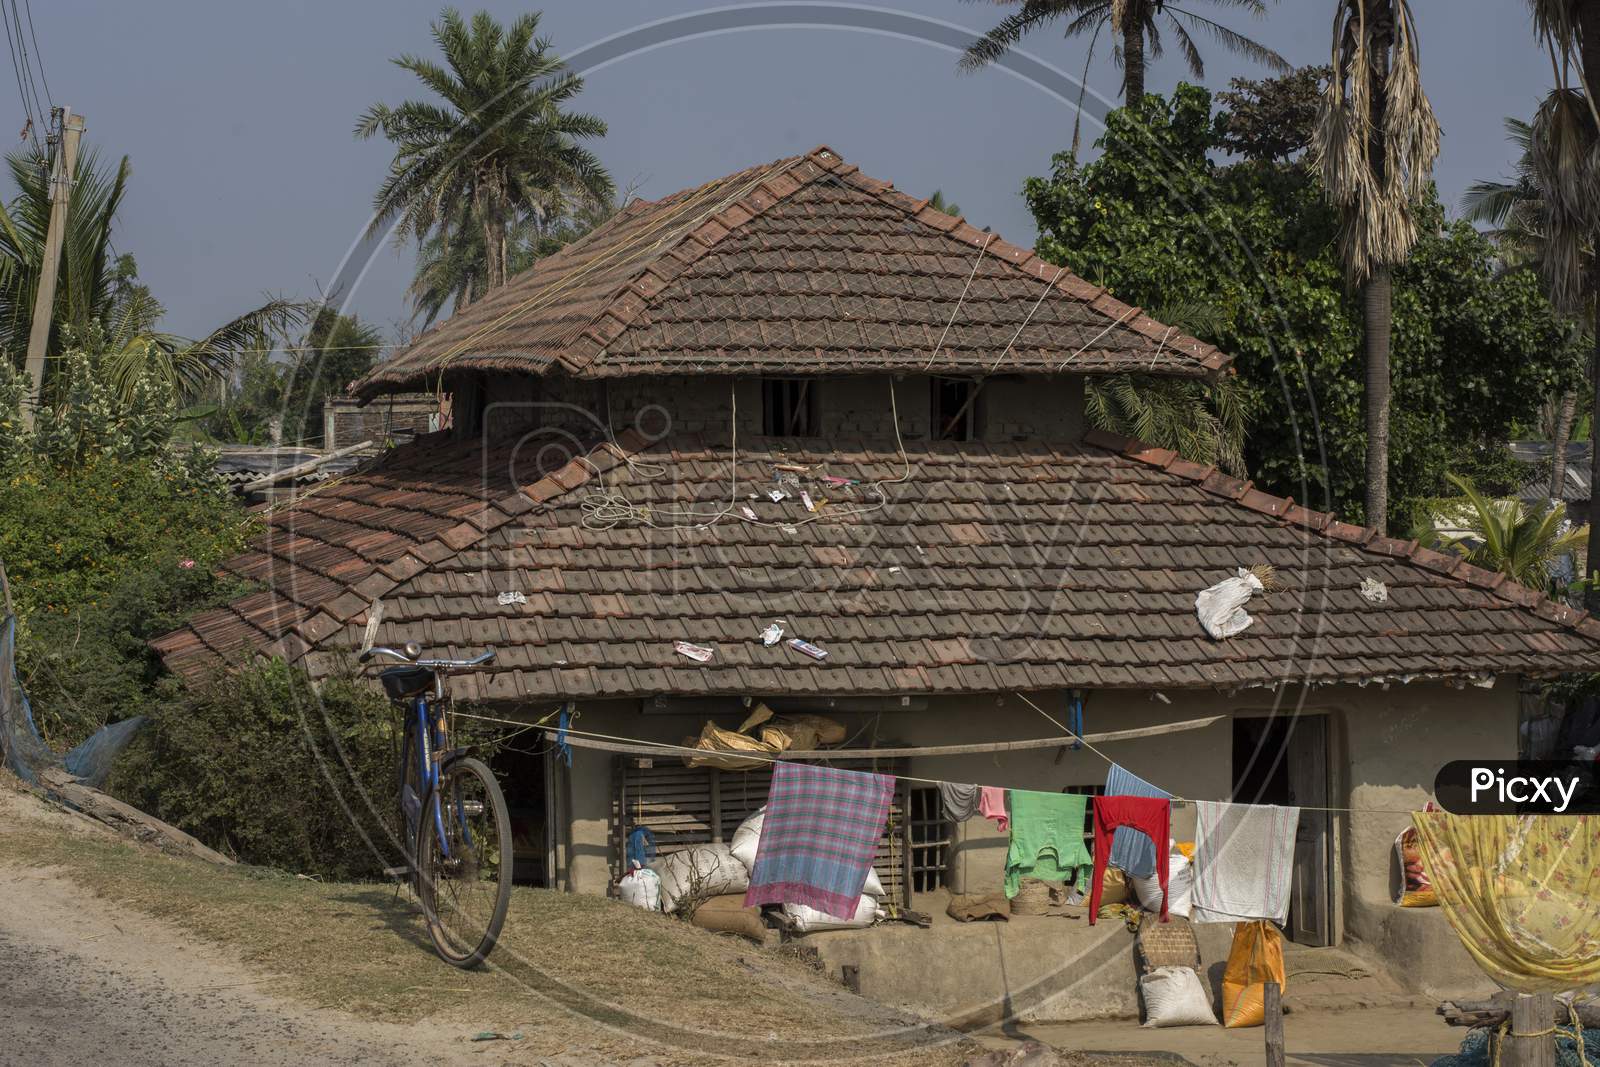 A Small Indian Village House Made With Clay And Roof Tiles.